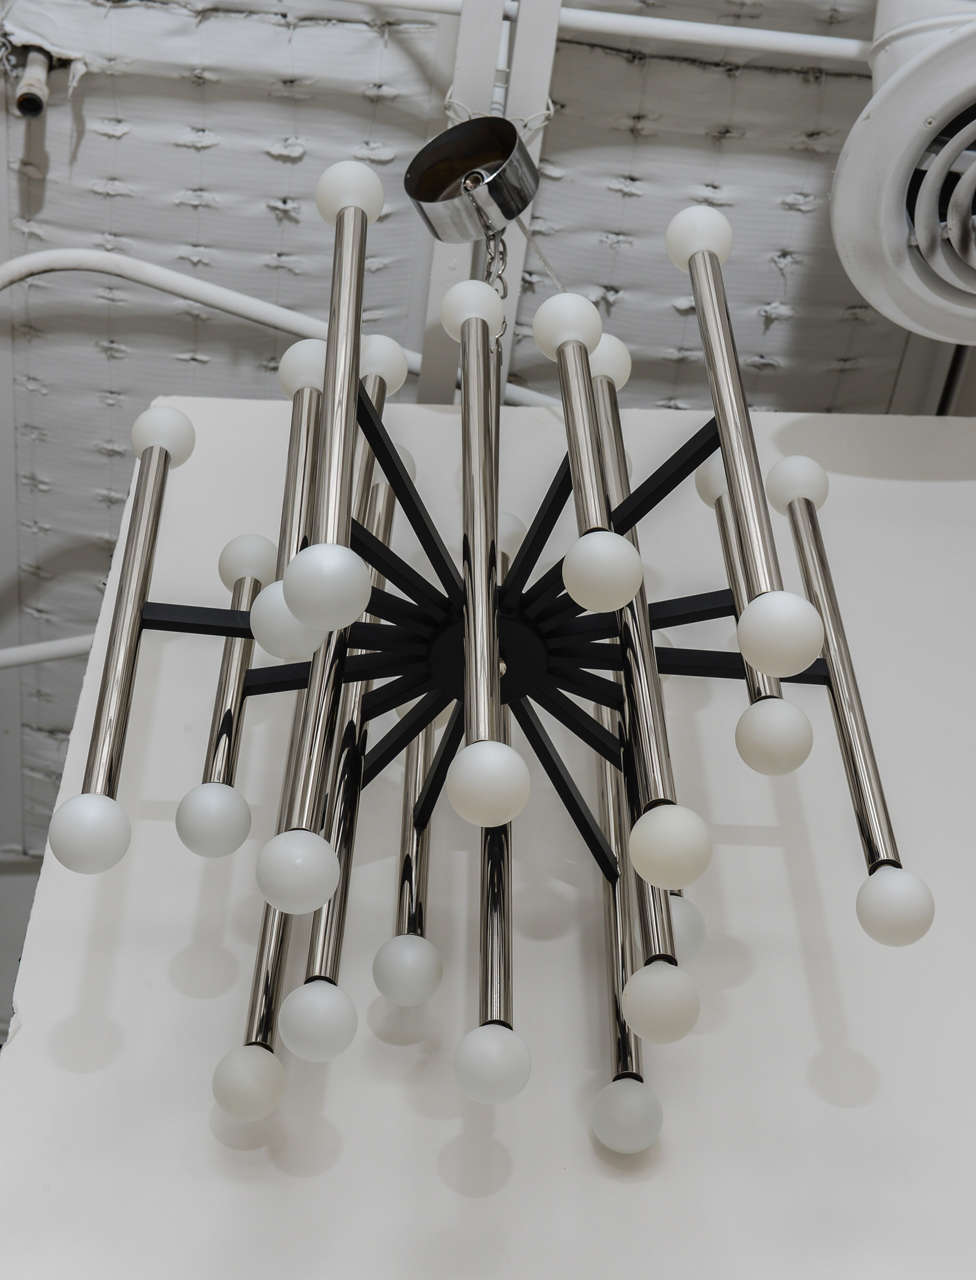 Sublimely simple and modern 36-light chandelier by Gaetano Sciolari, circa 1968. Black spokes radiating from the center support 18 polished aluminum vertical rods with sockets at both ends. Canopy retains original Sciolari label.